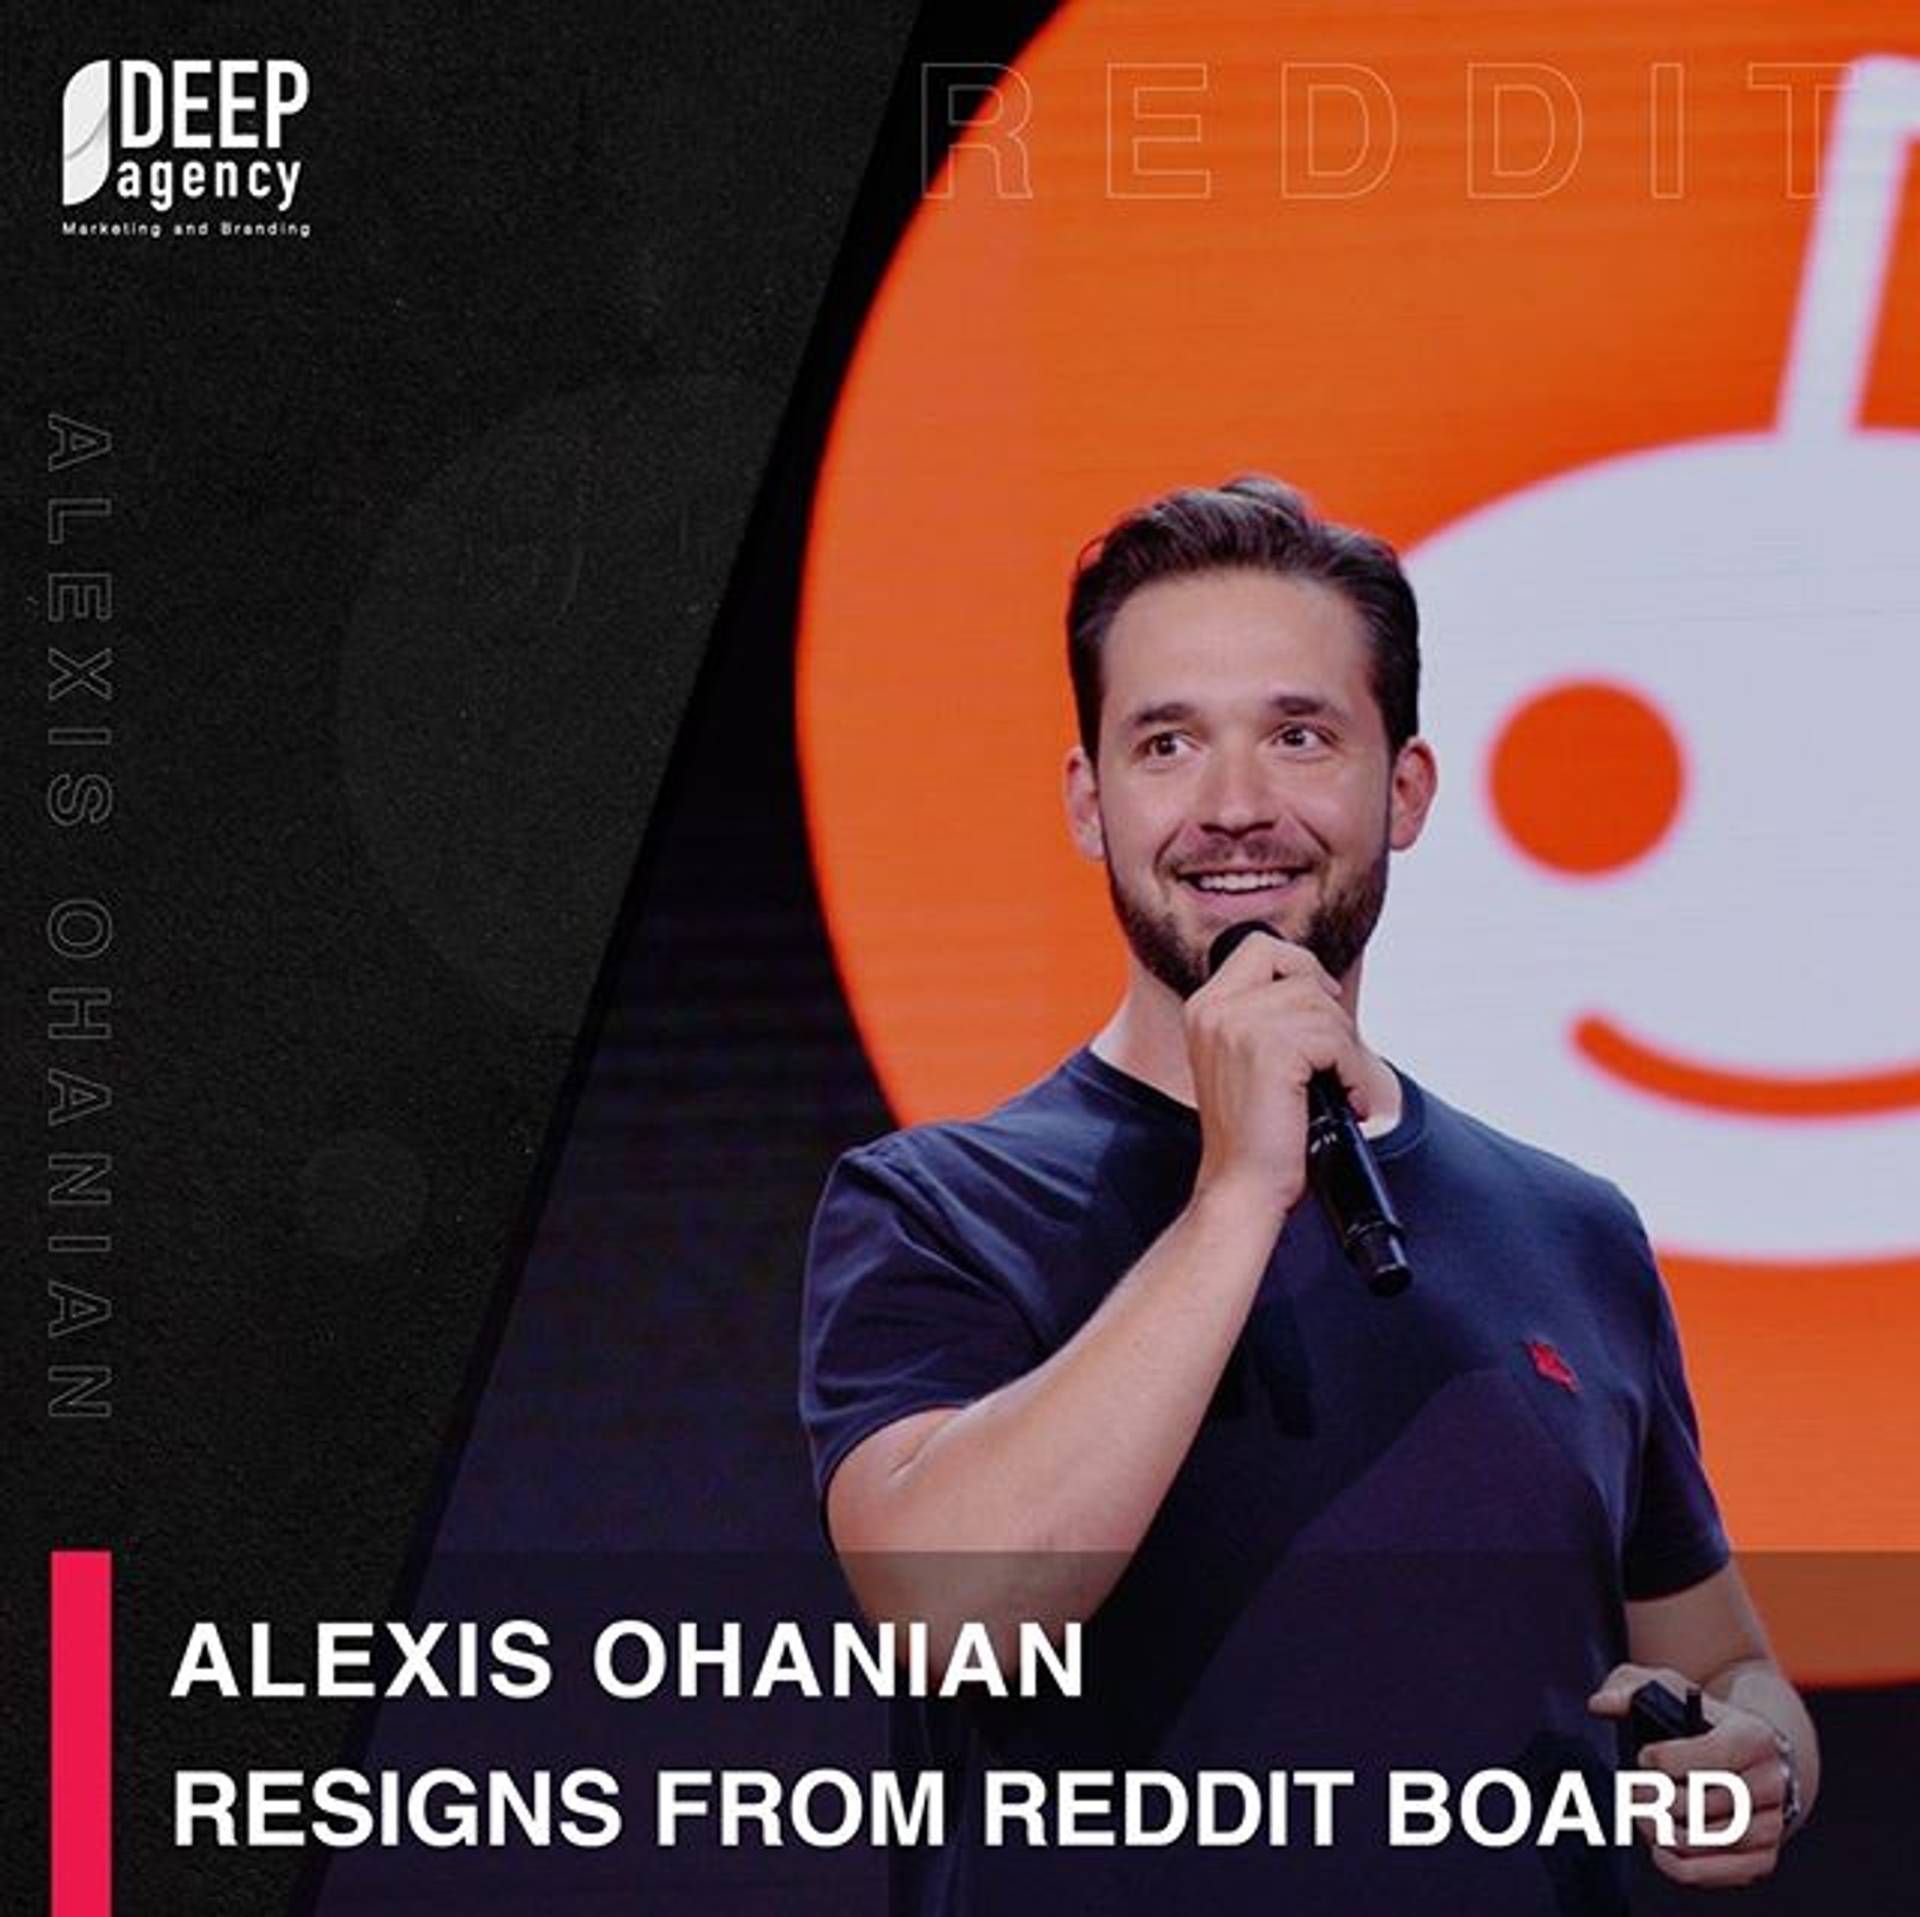 Reddit co-founder steps down to stand with BLM